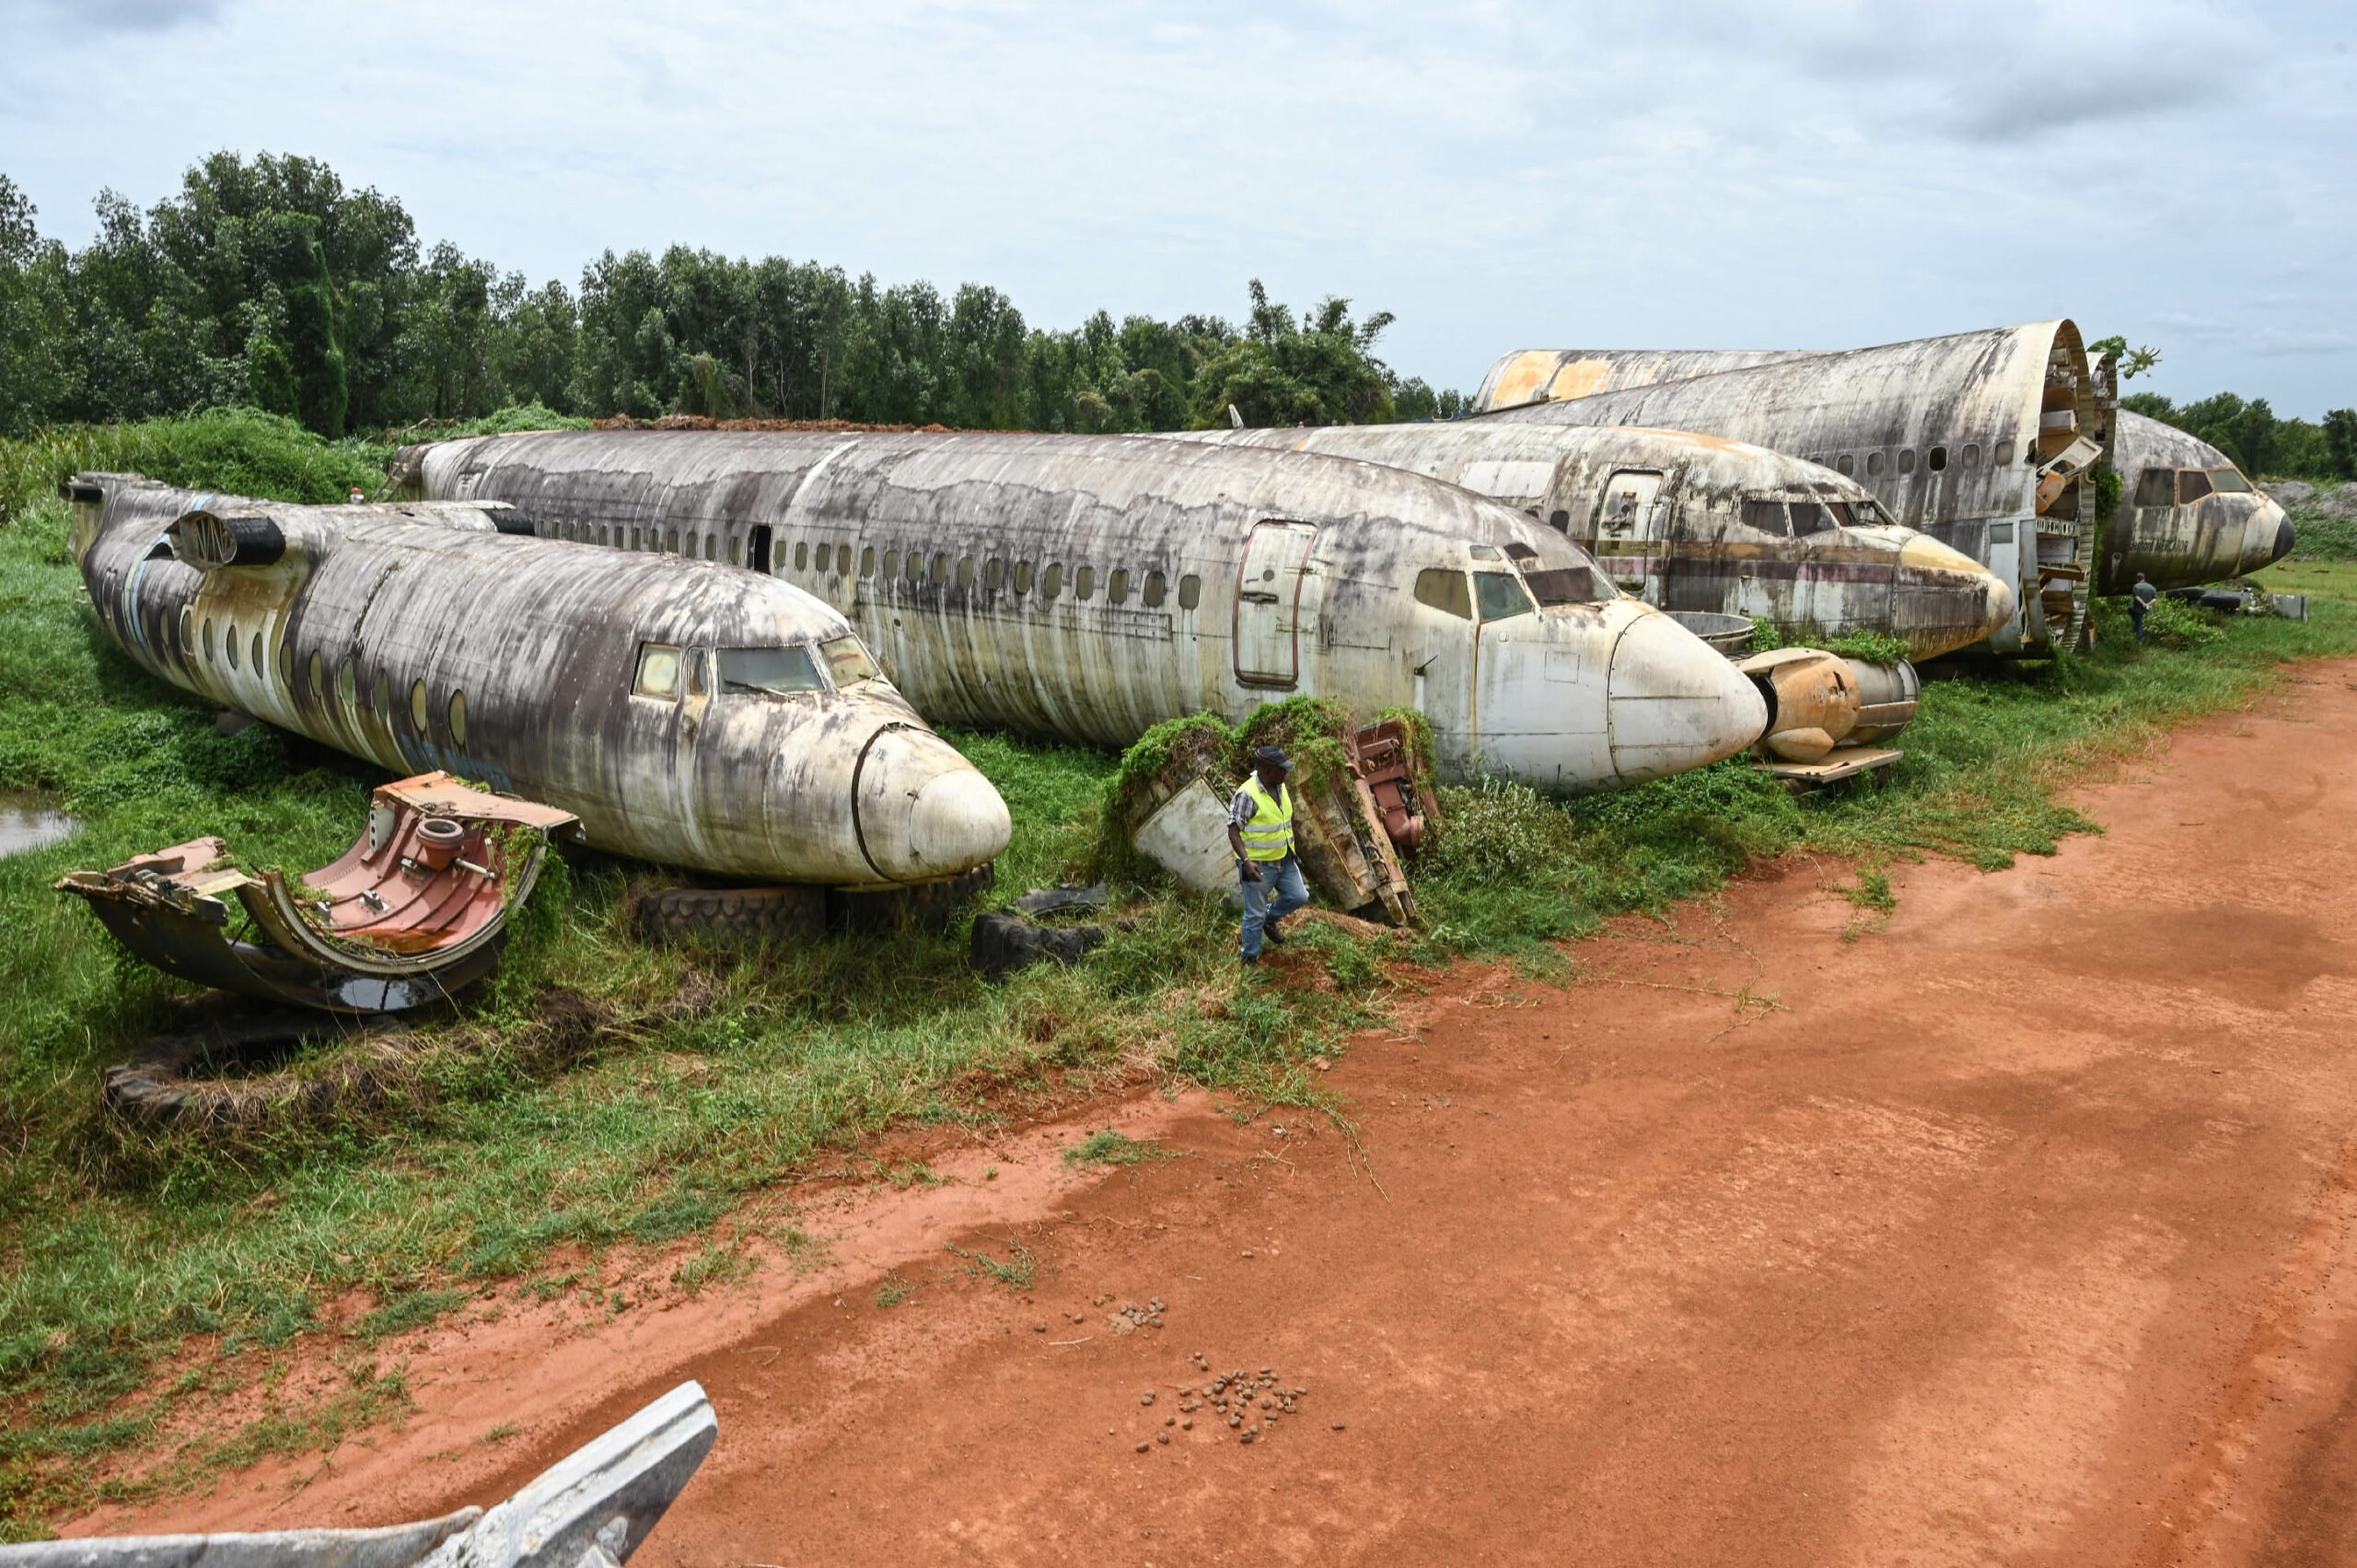 Ivory Coast: This crazy project aims to rehabilitate old planes into tourist attractions